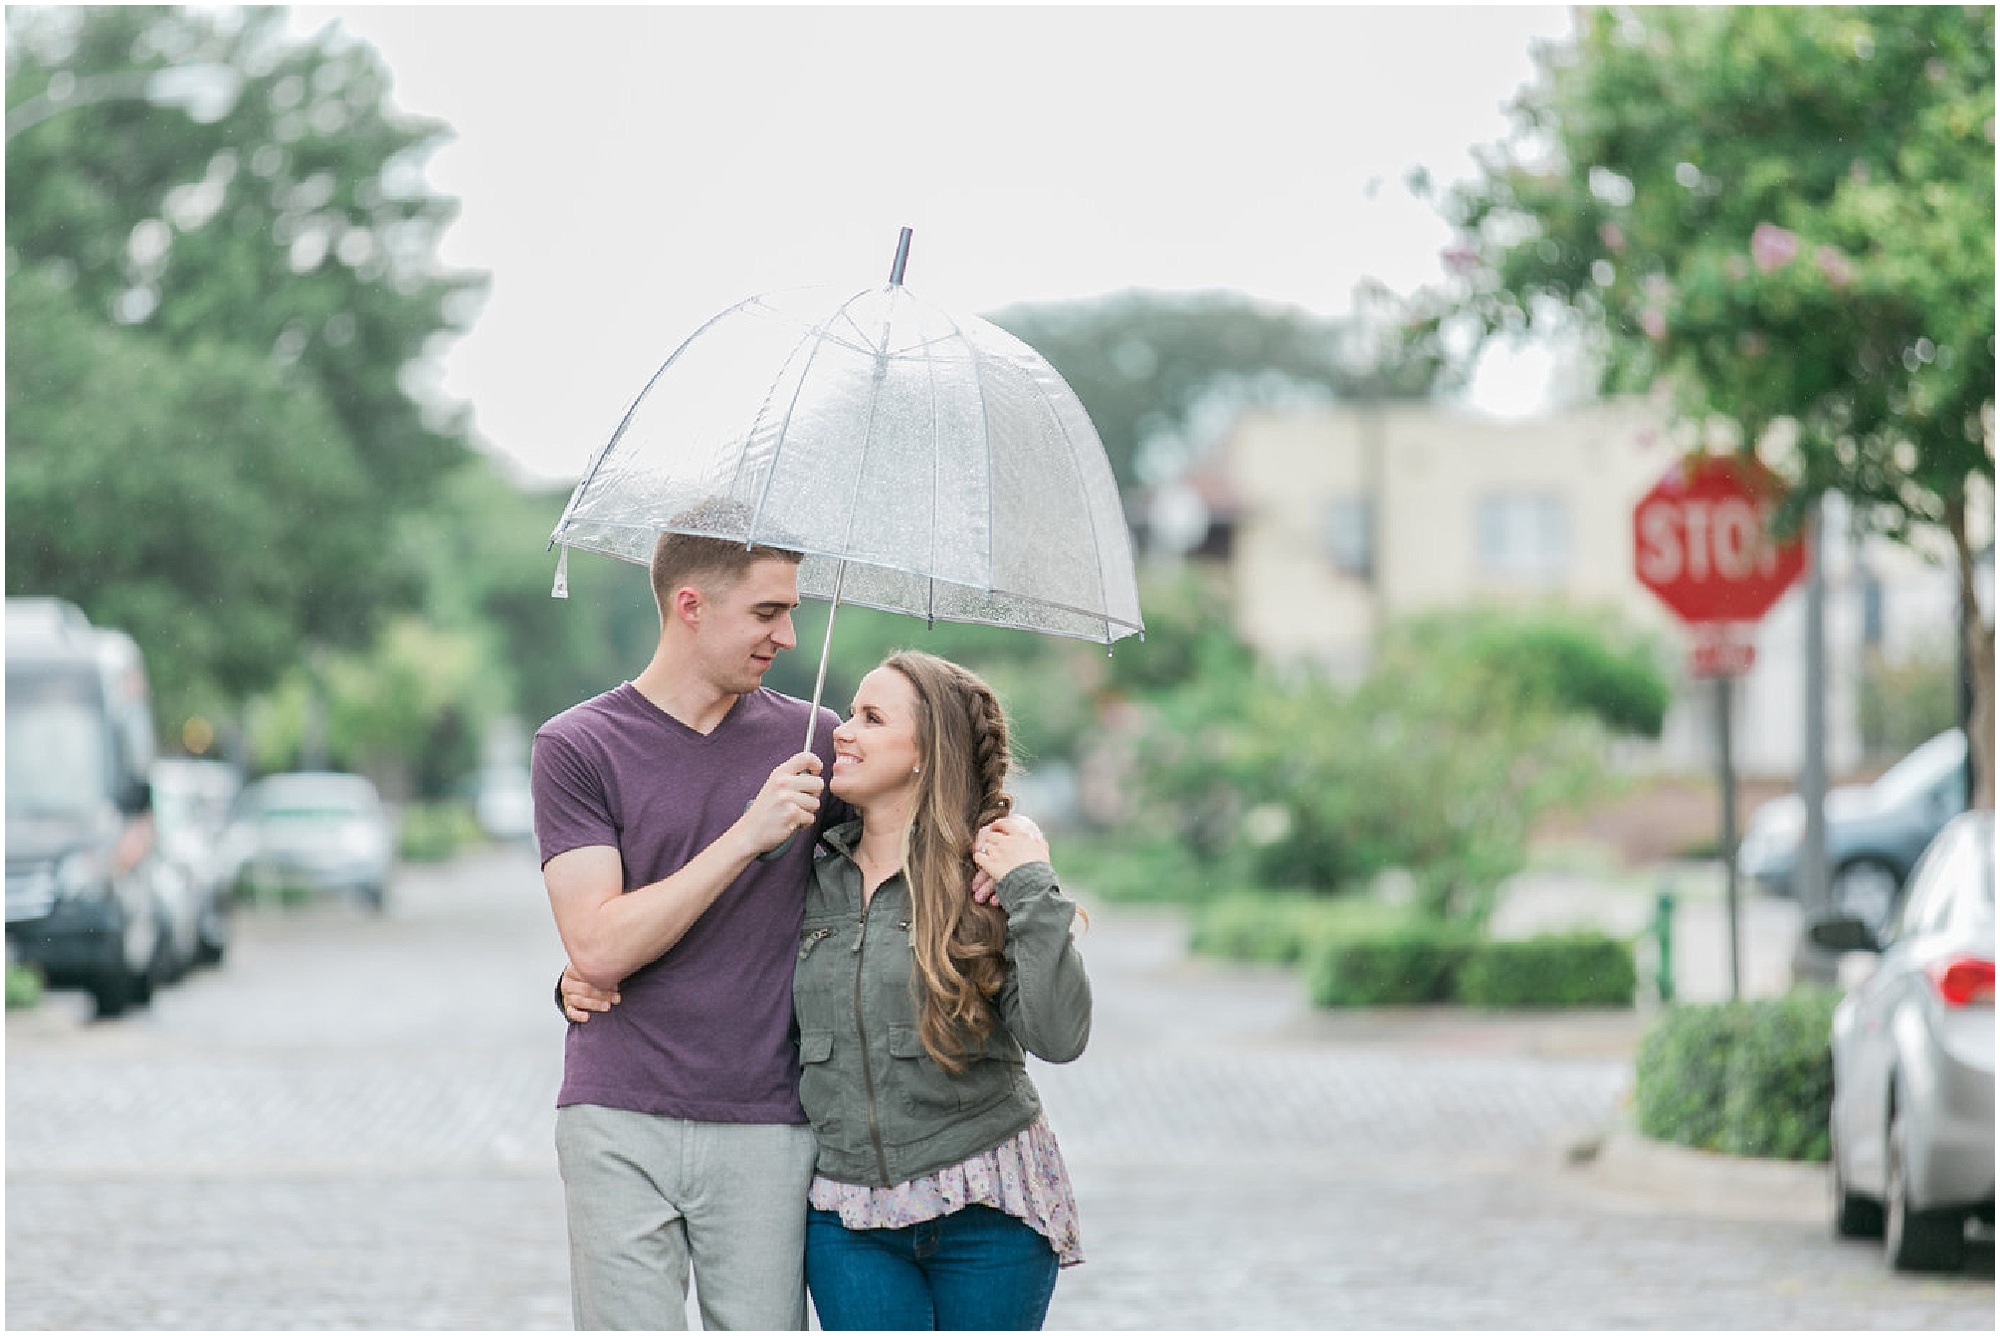 Guy holding an umbrella at engagement session.